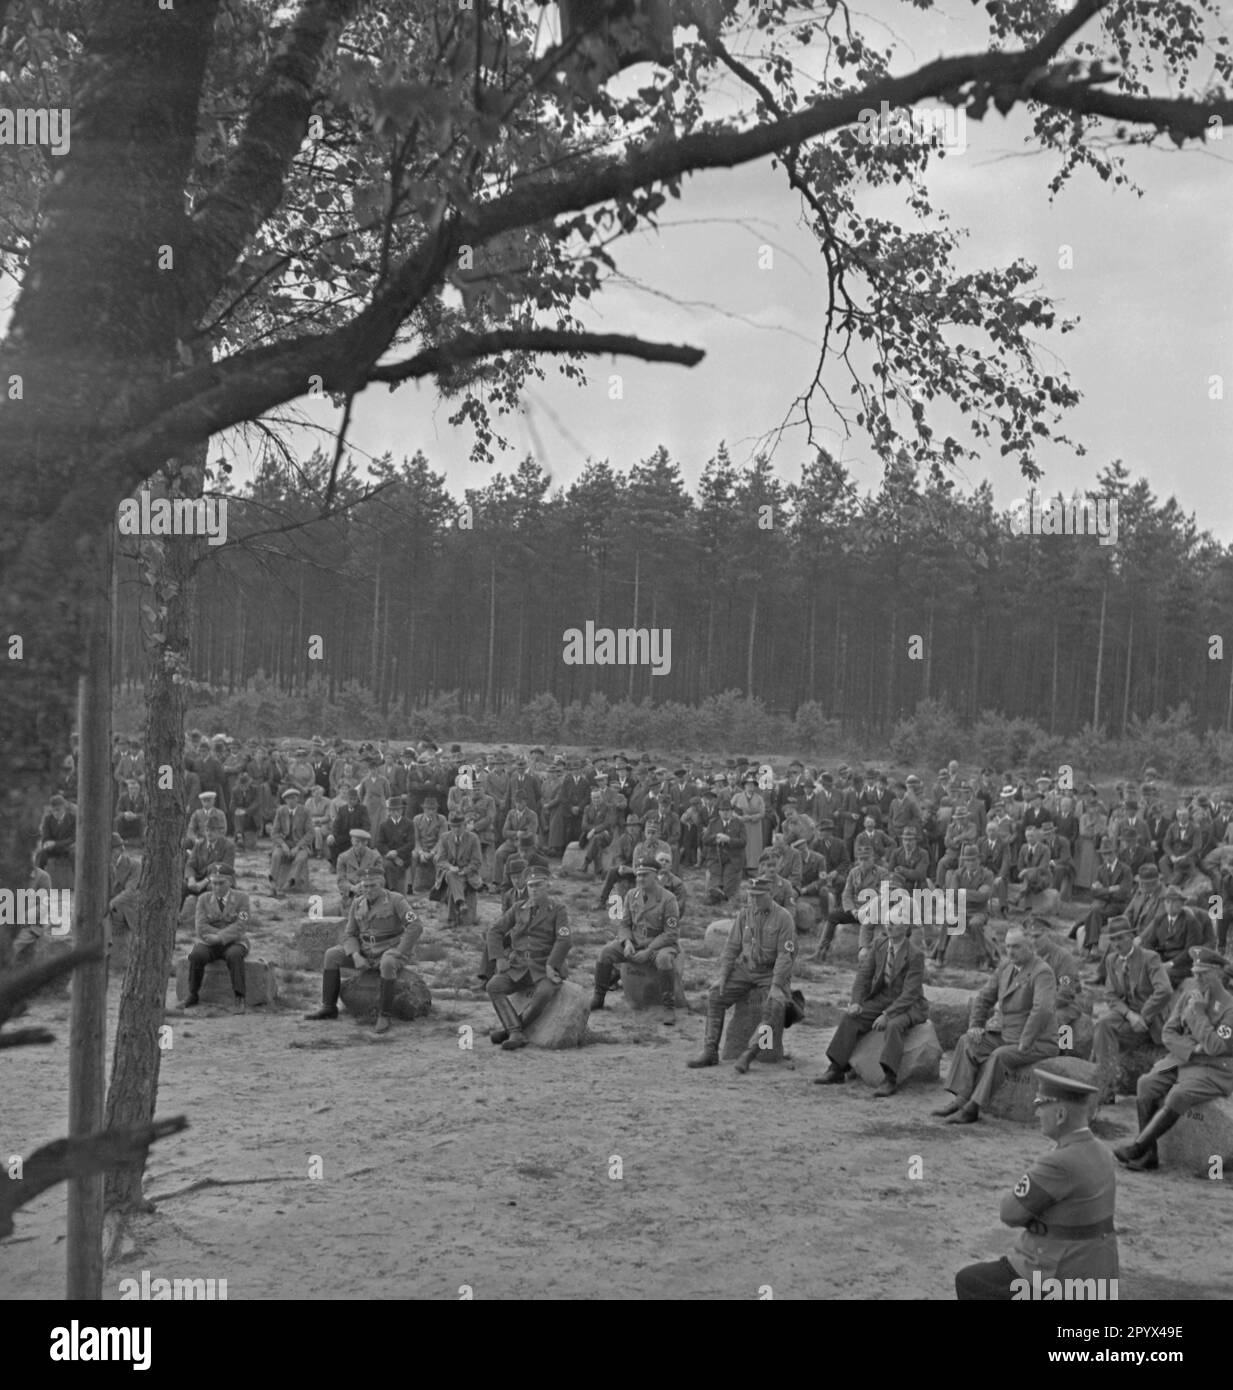 Photo of local farmers' representatives (some in SA uniforms, sitting on glacial erratics) of the neighboring communities at the inauguration of the Landtagsplatz in Hoesseringen in Suderburg in the Lueneburg Heath on June 28, 1936. In the background, spectators. At the front, an SS man sits on an altar built of a large glacial erratic. Stock Photo